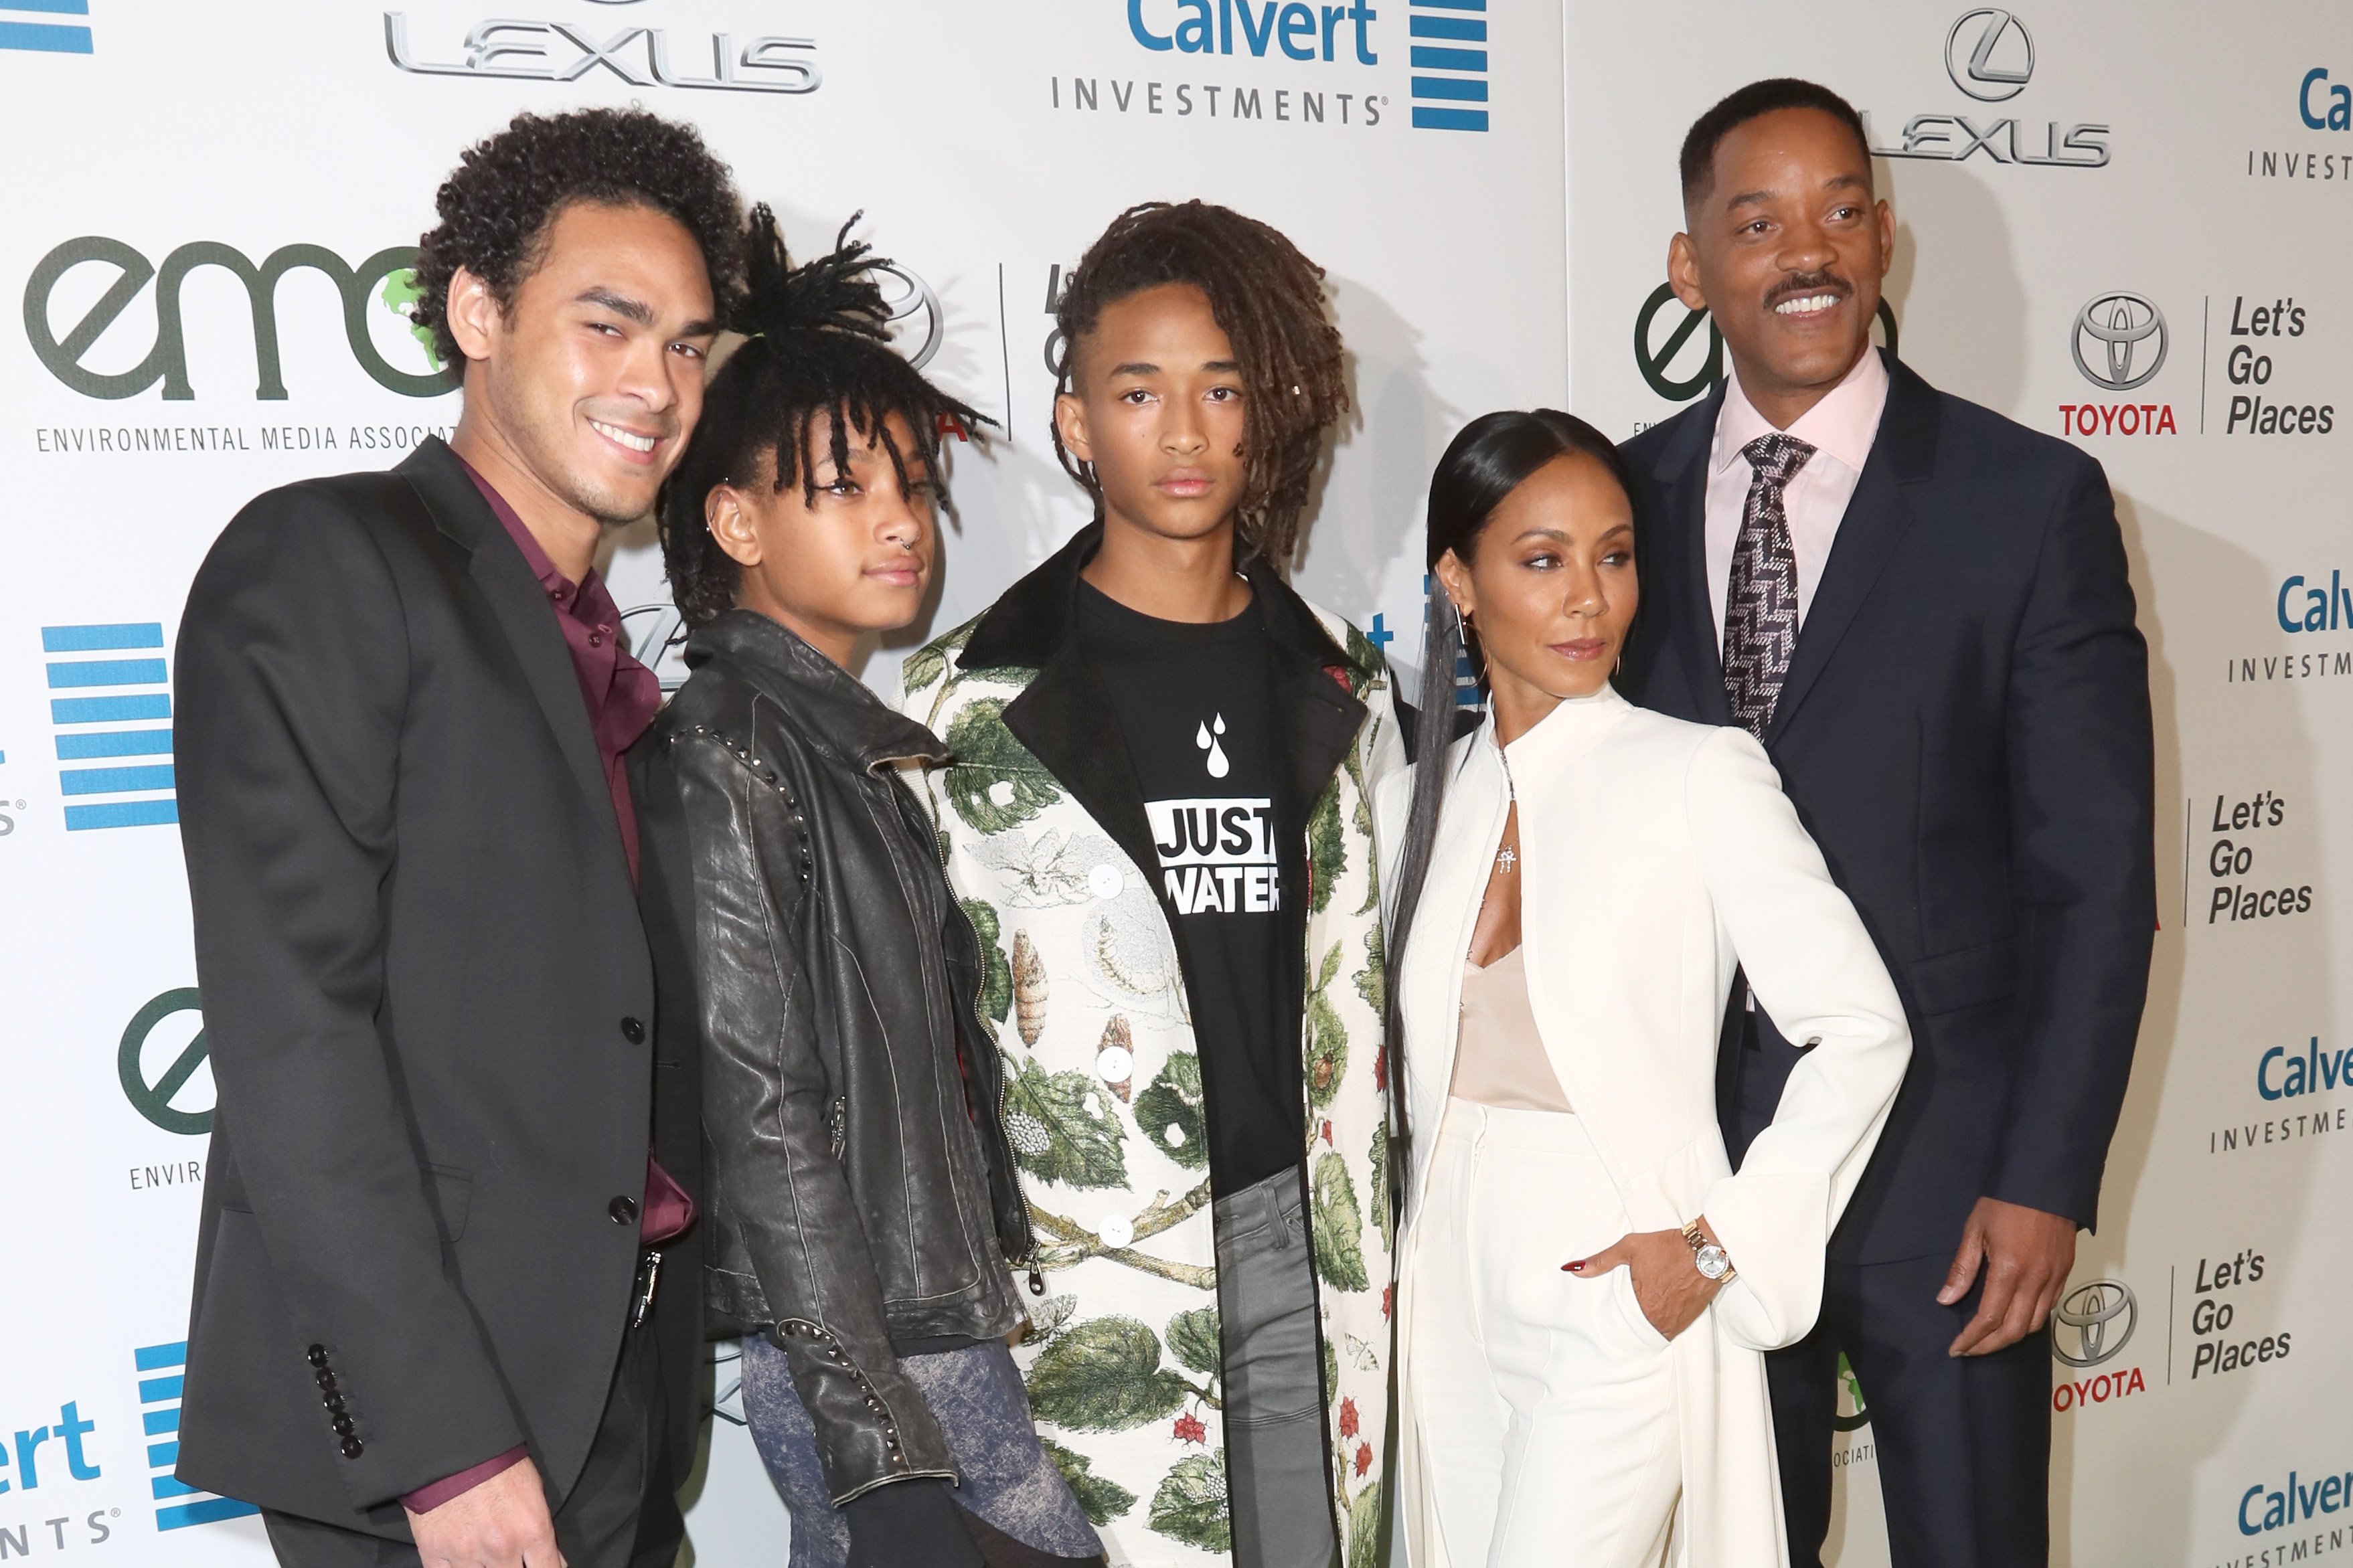 (L-R) Trey, Willow, Jaden, Jada & Will Smith at the 26th Annual EMA Awards on Oct. 22, 2016 in California | Photo: Getty Images